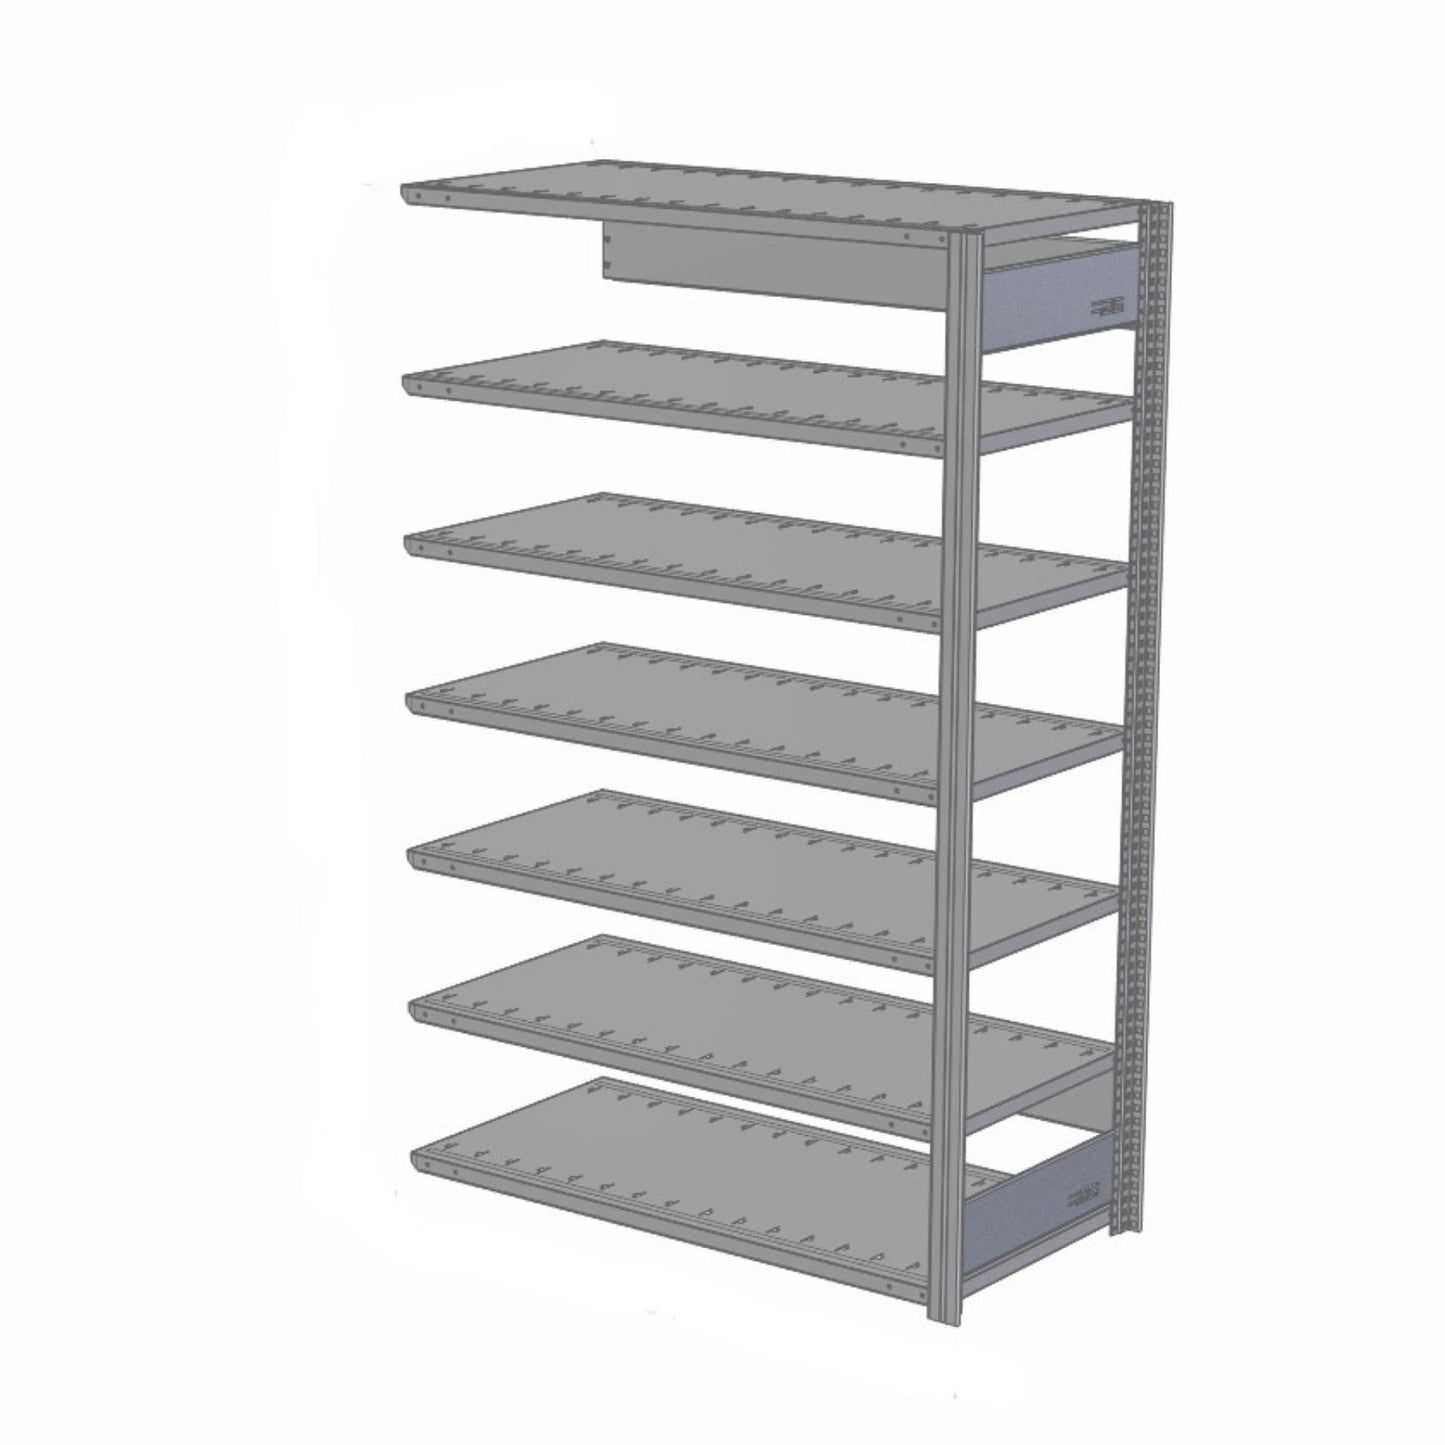 Shelving system 99 height x 48 width x 12 depth | Option: Open / Closed